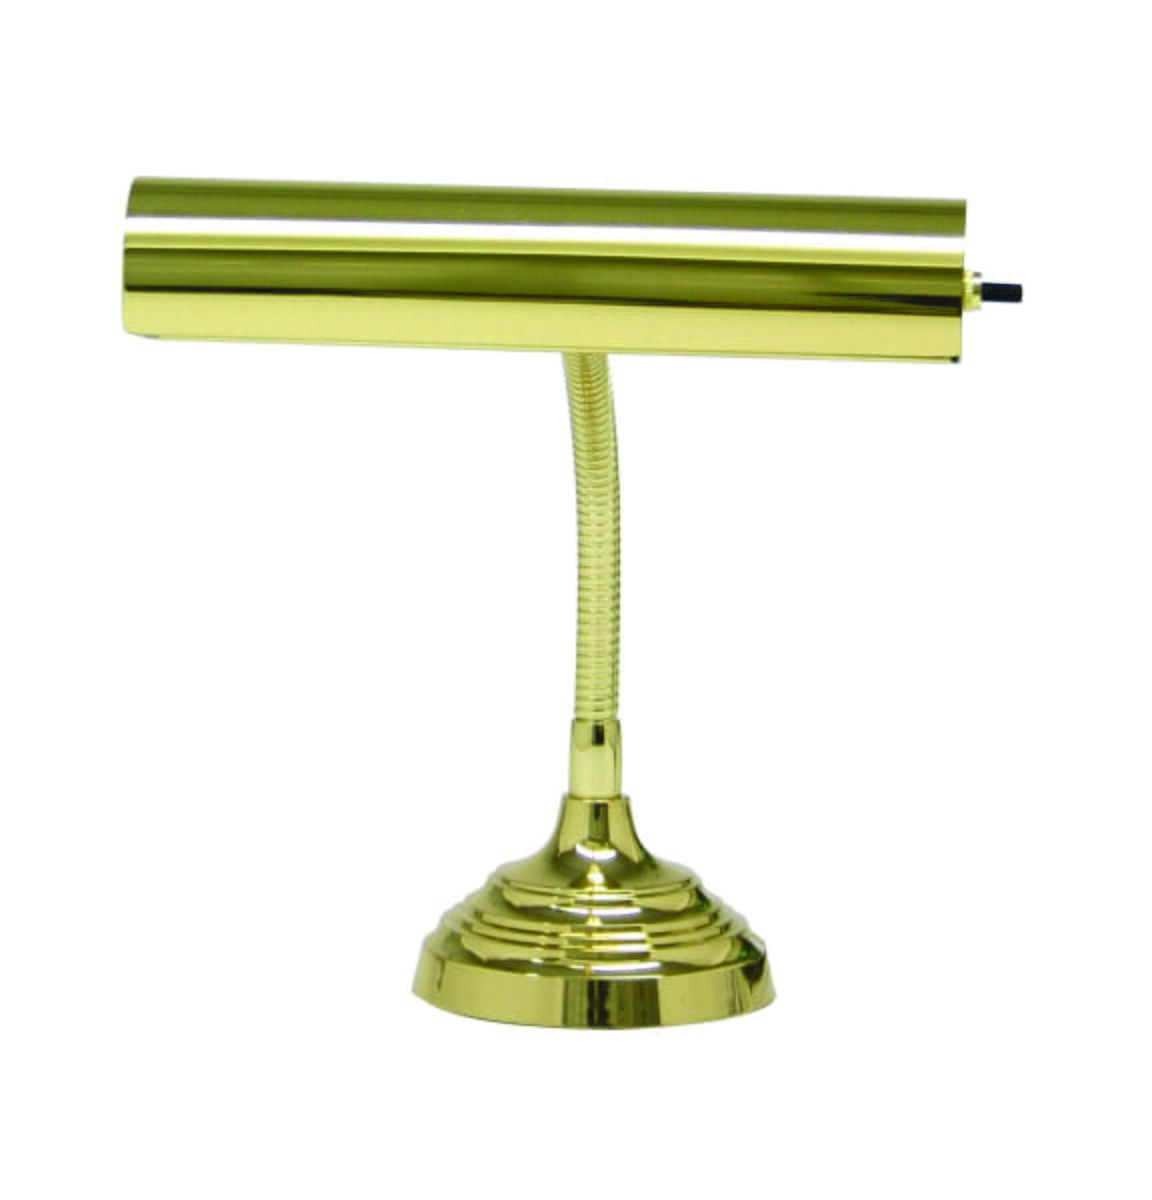 House of Troy 10"" Polished Brass Adjustable Goose Neck Piano Lamp -  P10-130